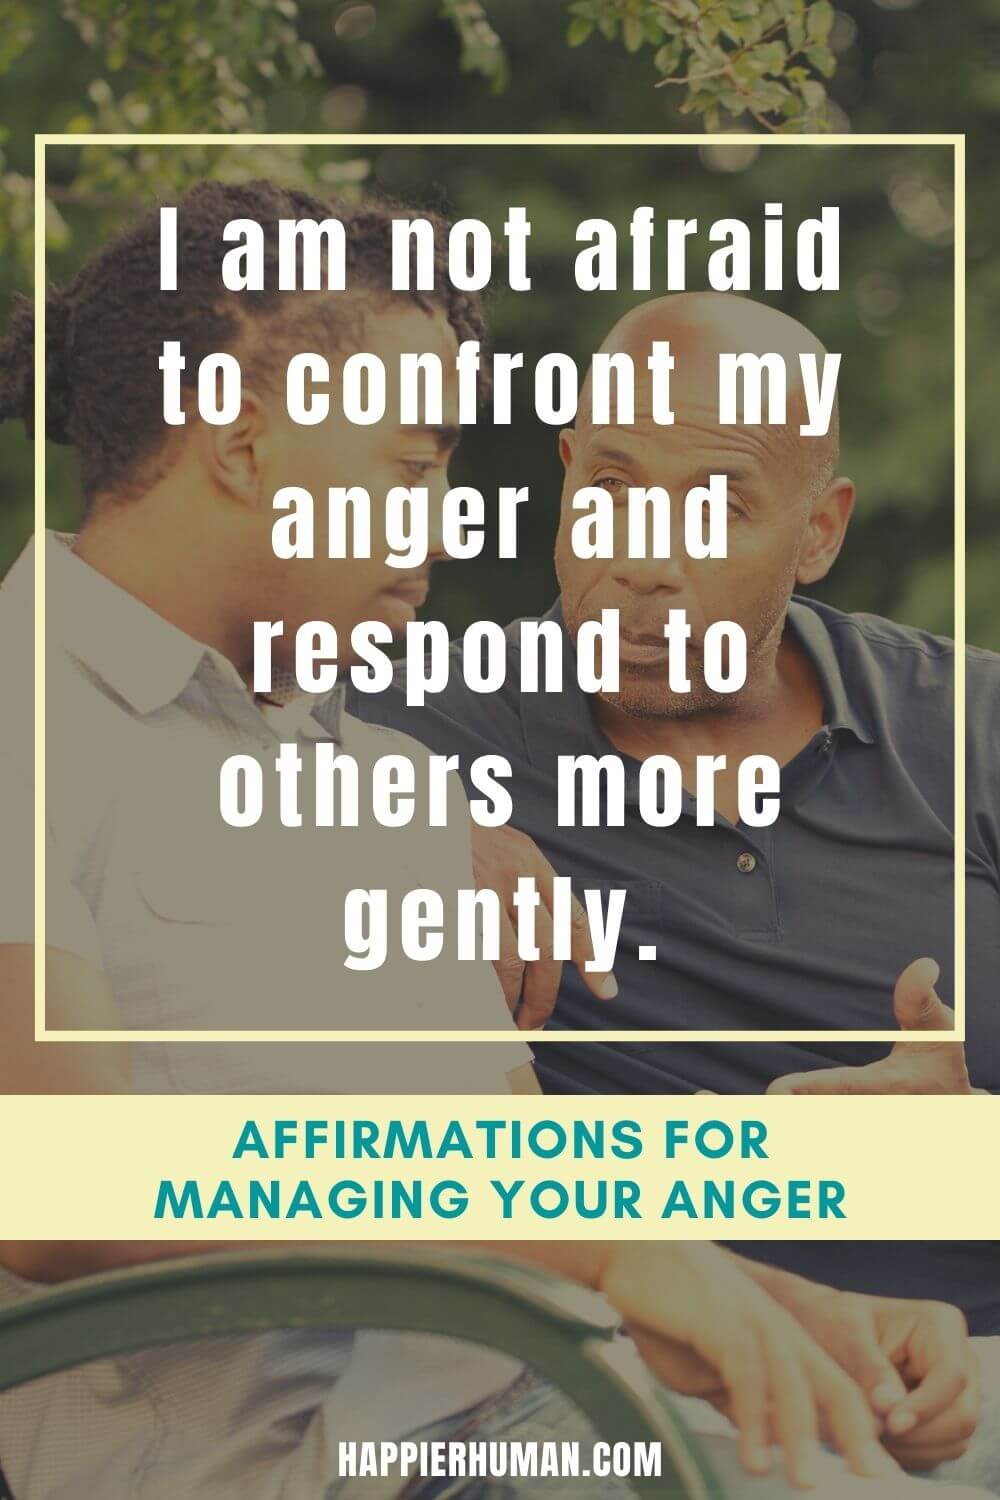 Affirmations for Anger - I am not afraid to confront my anger and respond to others more gently. | affirmations for sadness | affirmations for irritability | anger management and positive thinking